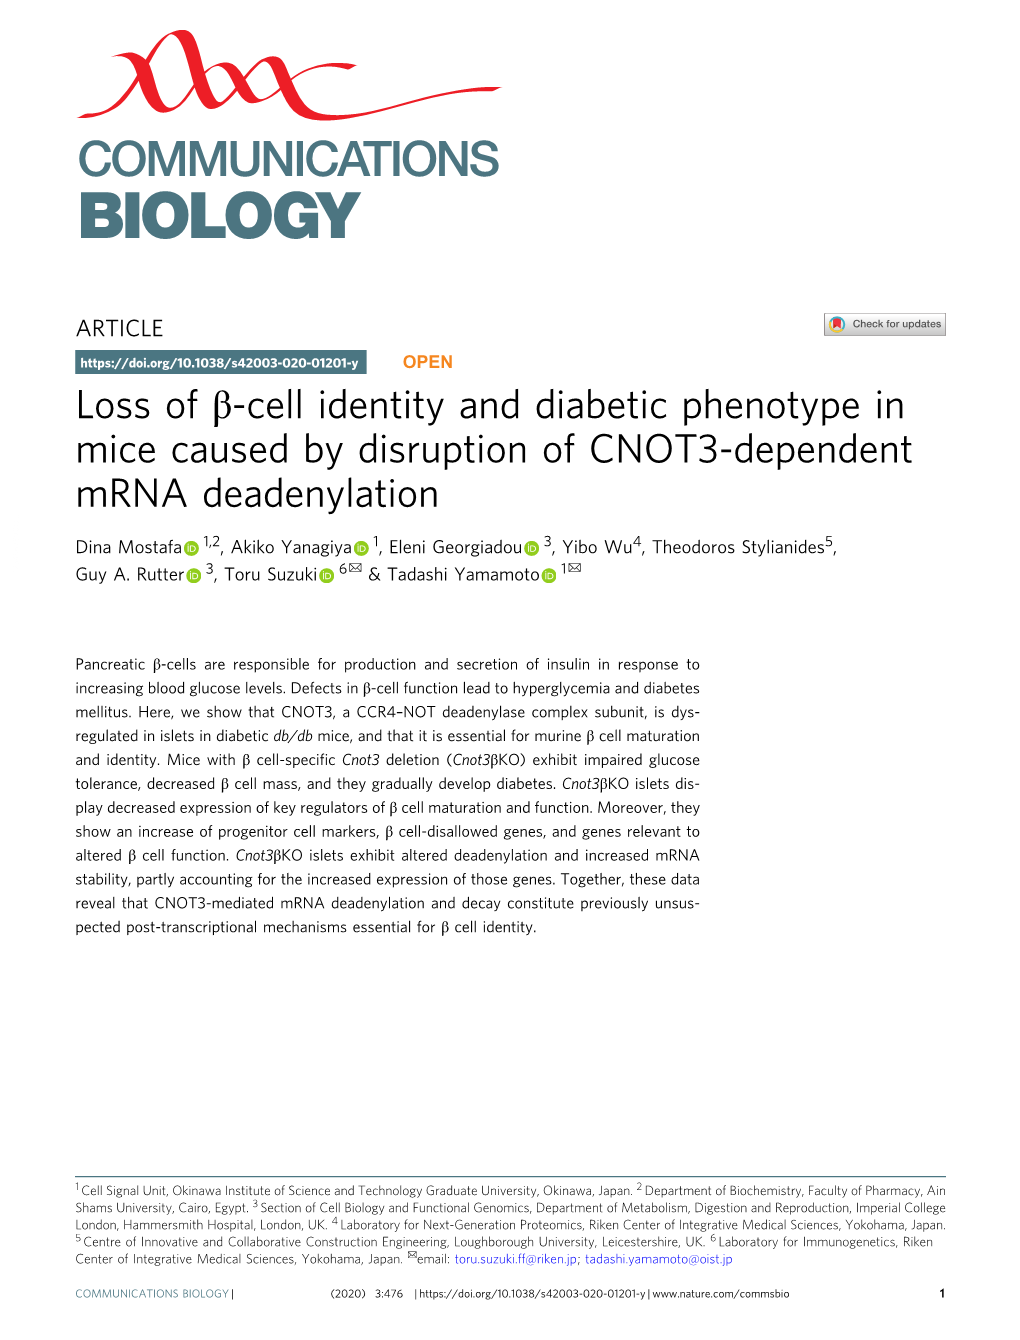 Loss of Î²-Cell Identity and Diabetic Phenotype in Mice Caused By